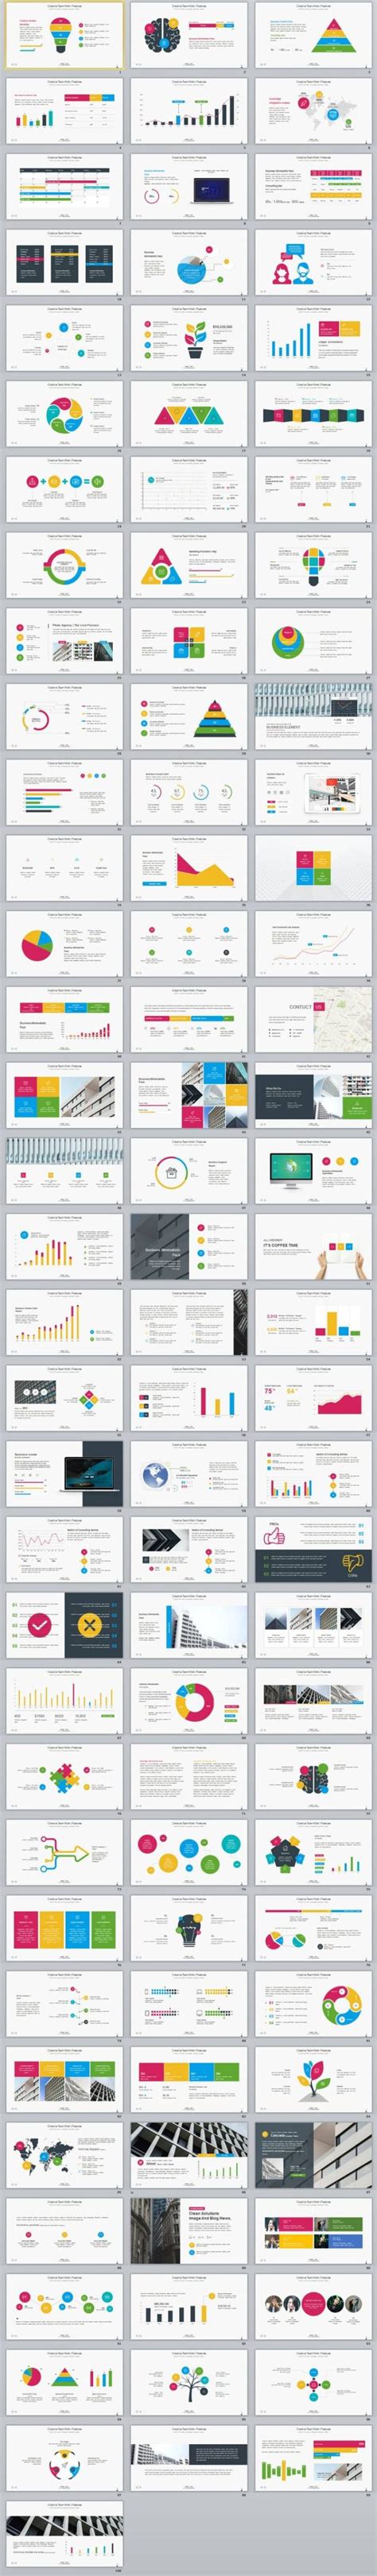 Infographic Design 100 Ultimate Infographics Creative Powerpoint